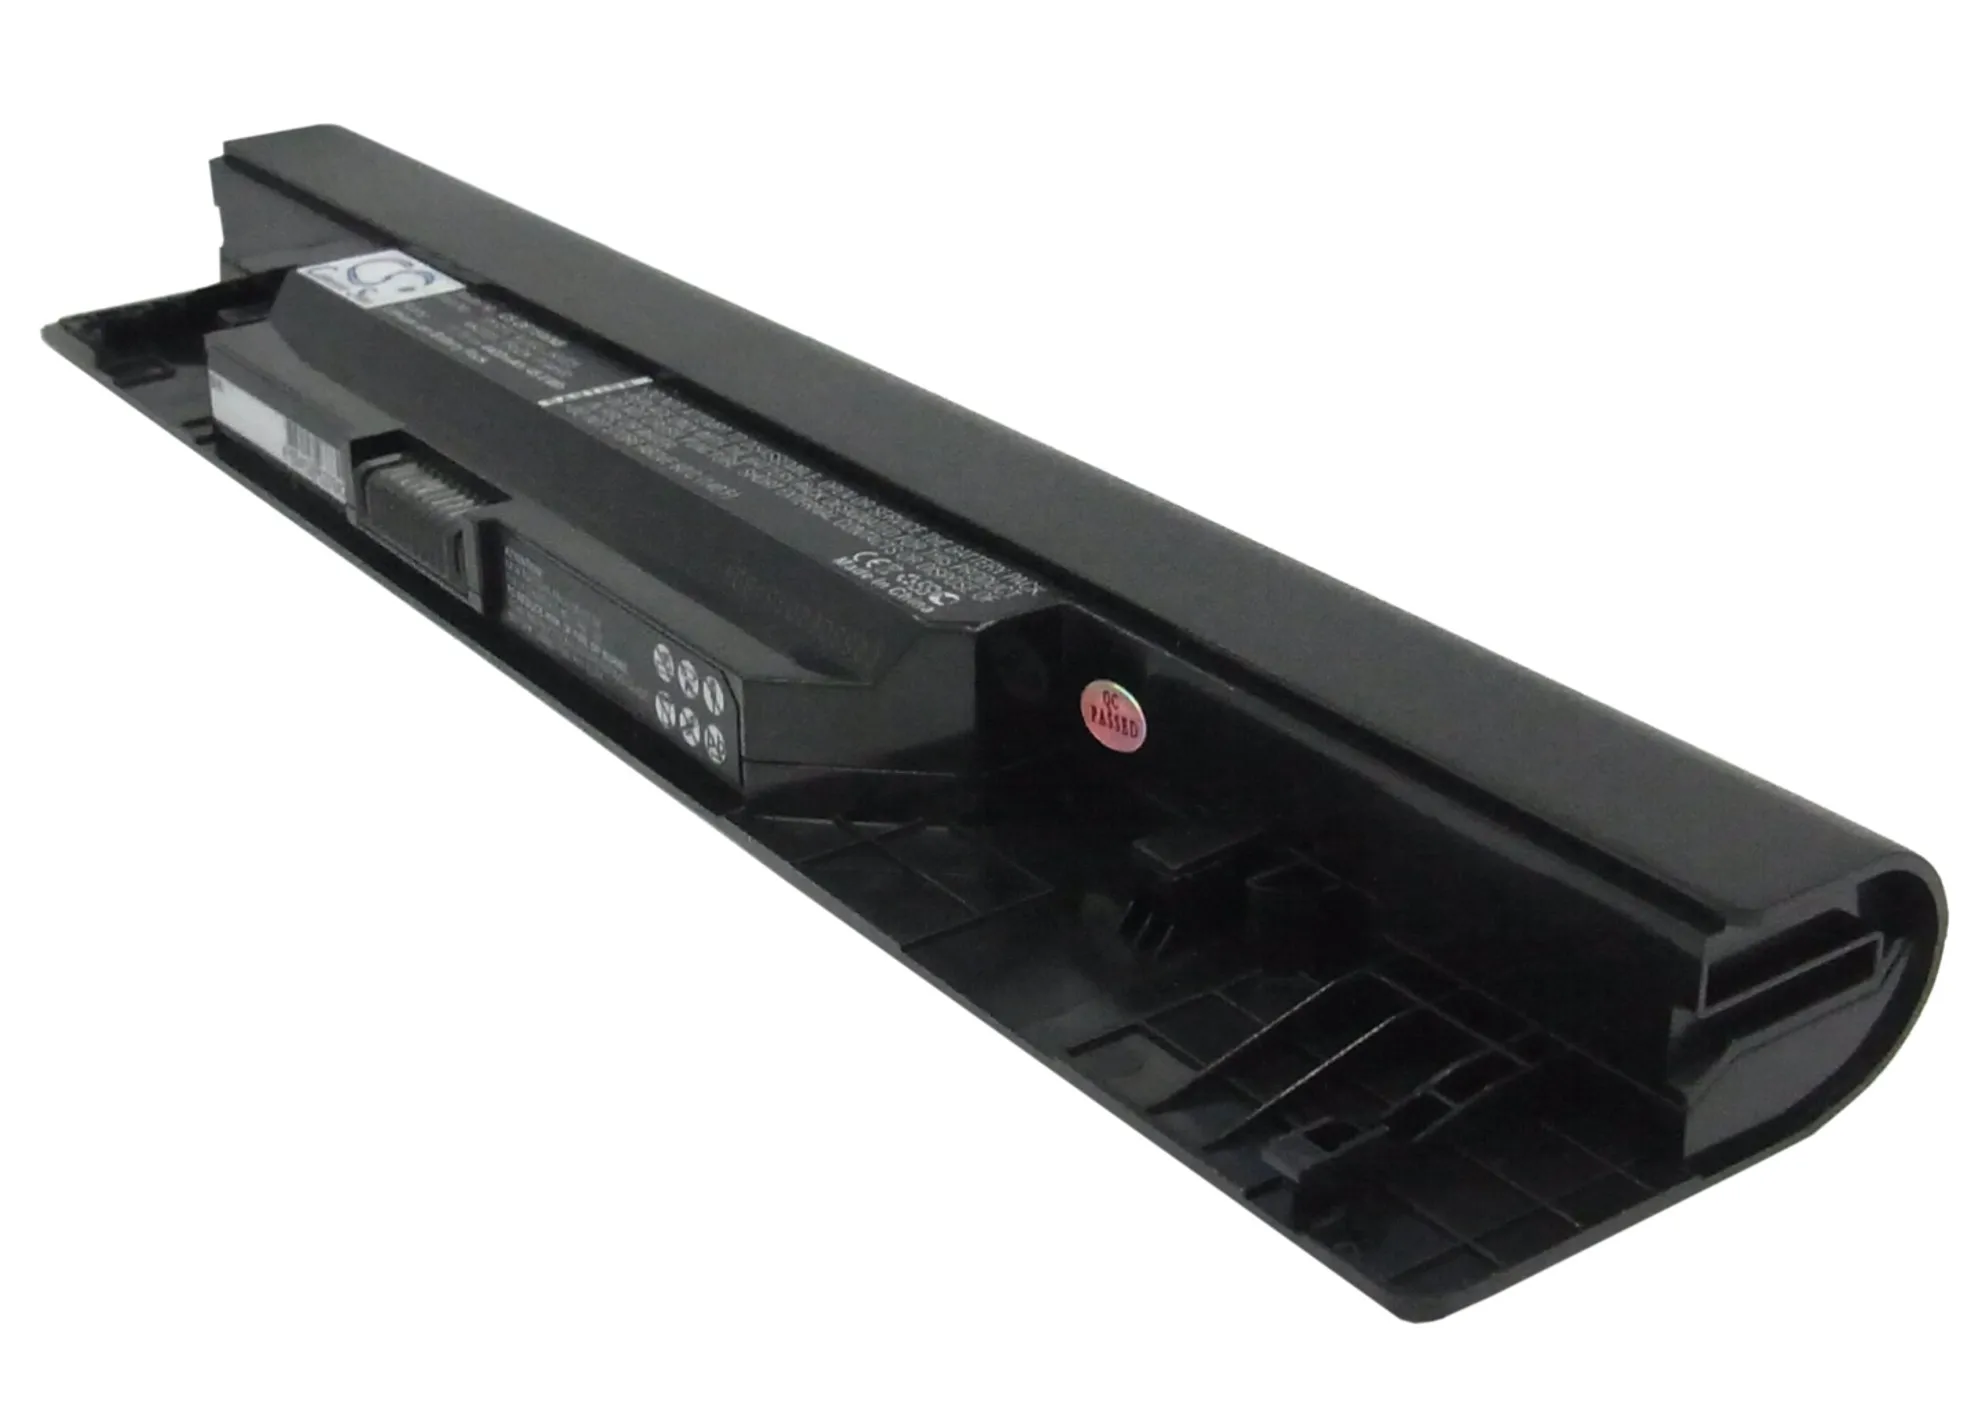 

CS 4400mAh/48.84Wh battery for DELL Inspiron 14,1464,1464D,1464R,15,15 1564,1564,1564D,1564R,17,17 1764, 1764